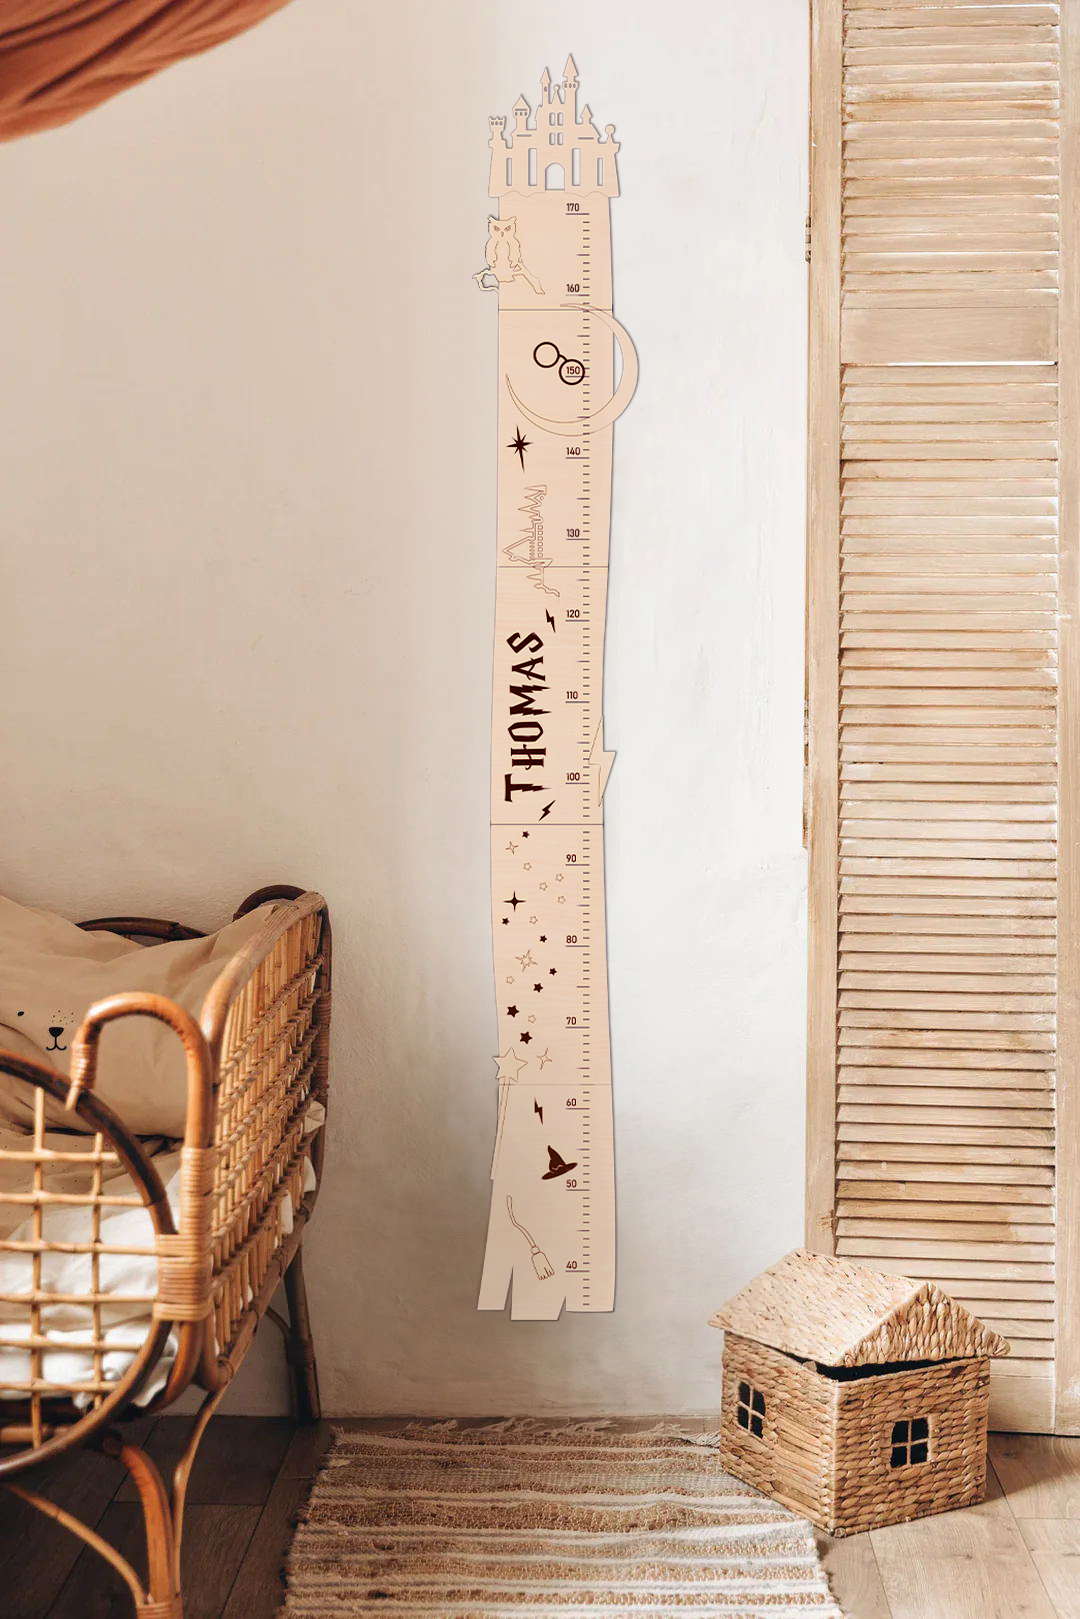 Personalized Wooden Kids Growth Ruler - Castle